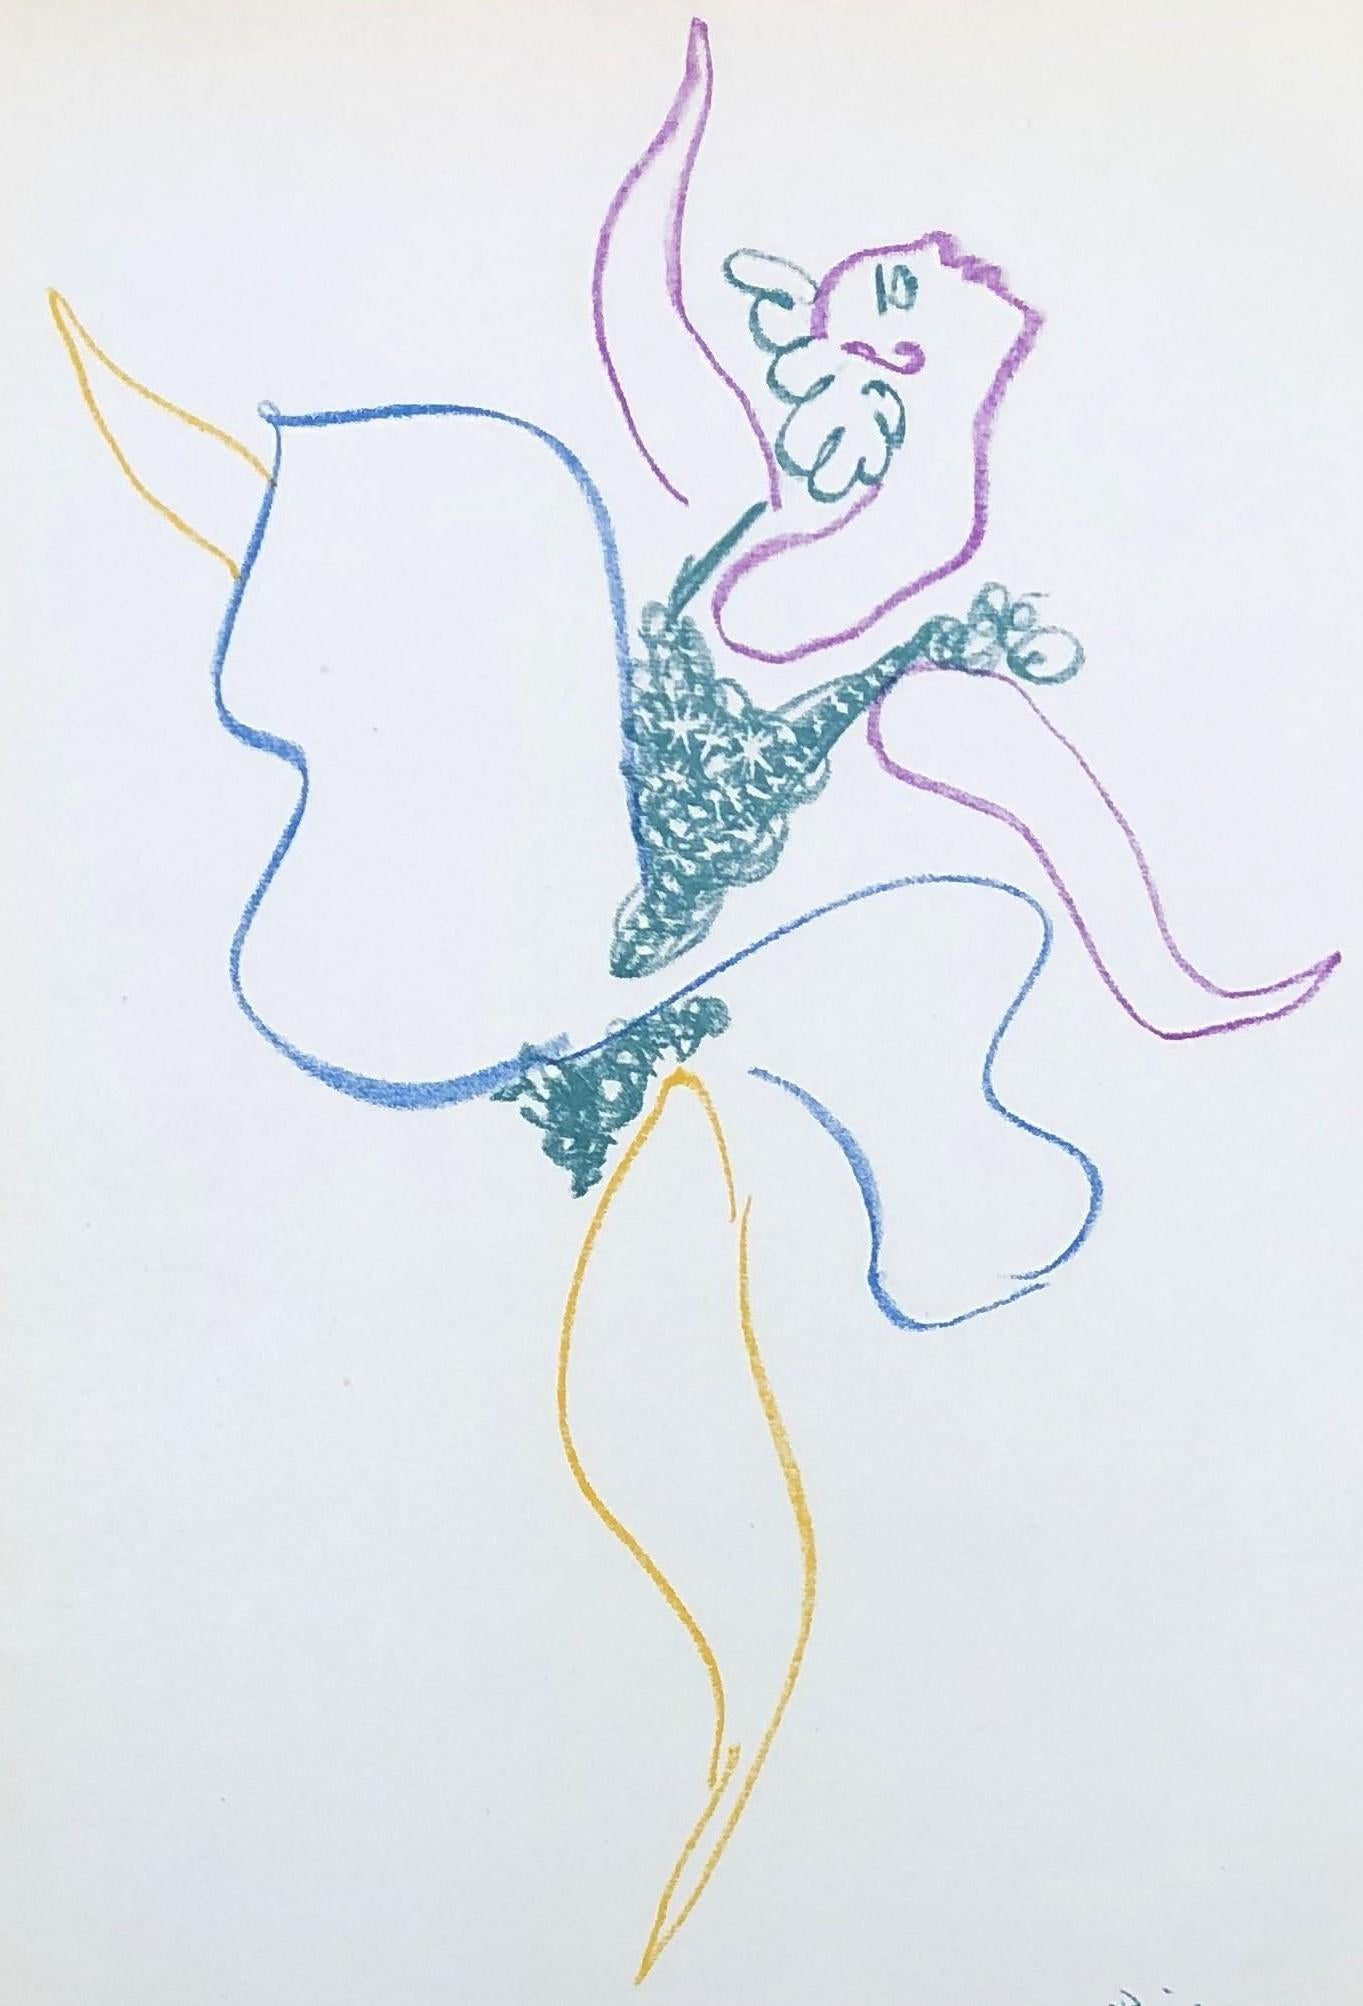 Ballet : The Dancer - Lithograph - Printed Signature #Ref. Bloch #767 - White Figurative Print by Pablo Picasso